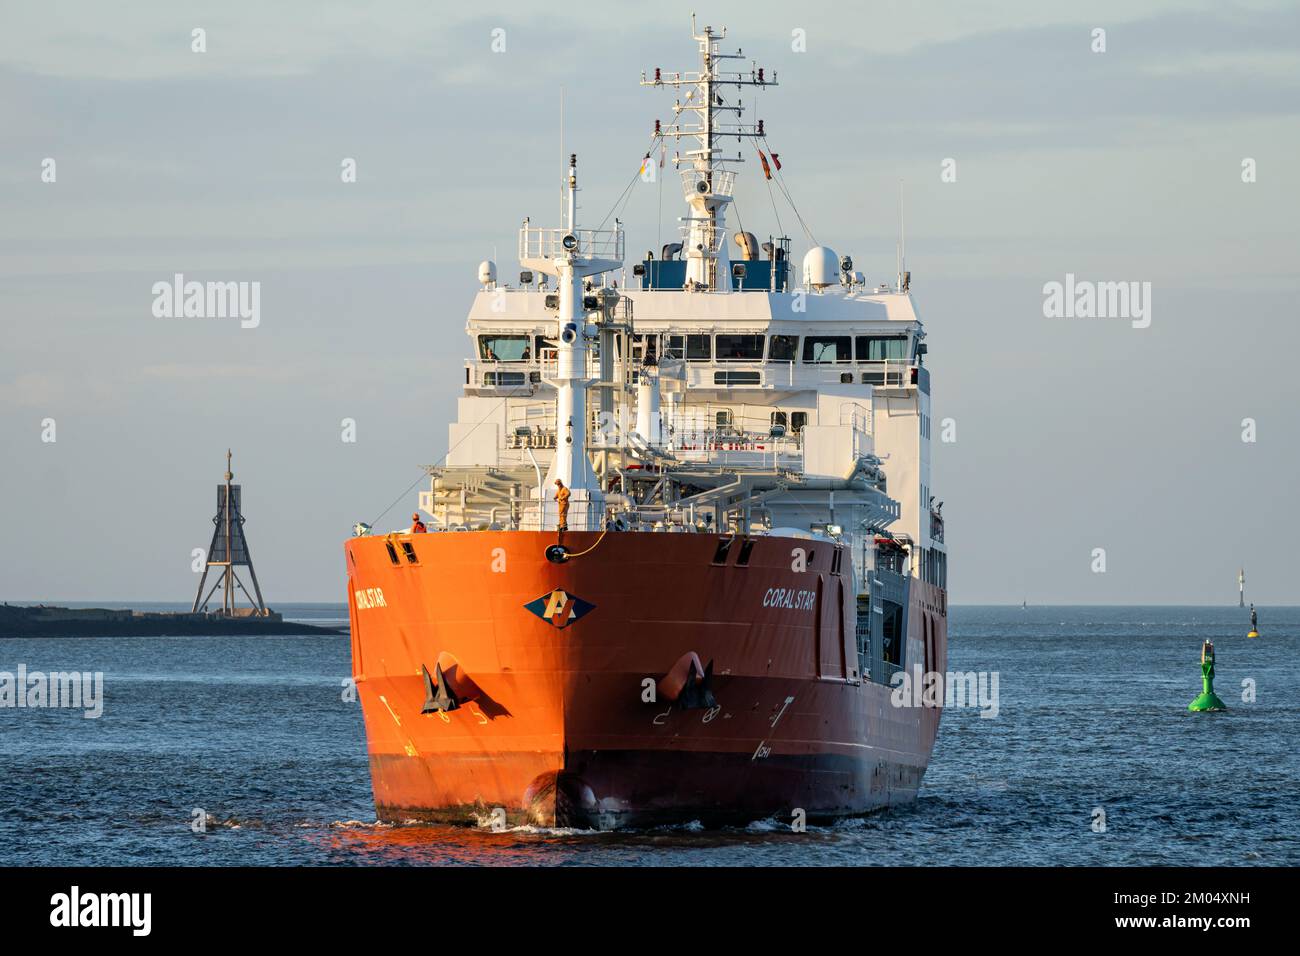 LNG carrier CORAL STAR on the river Elbe Stock Photo